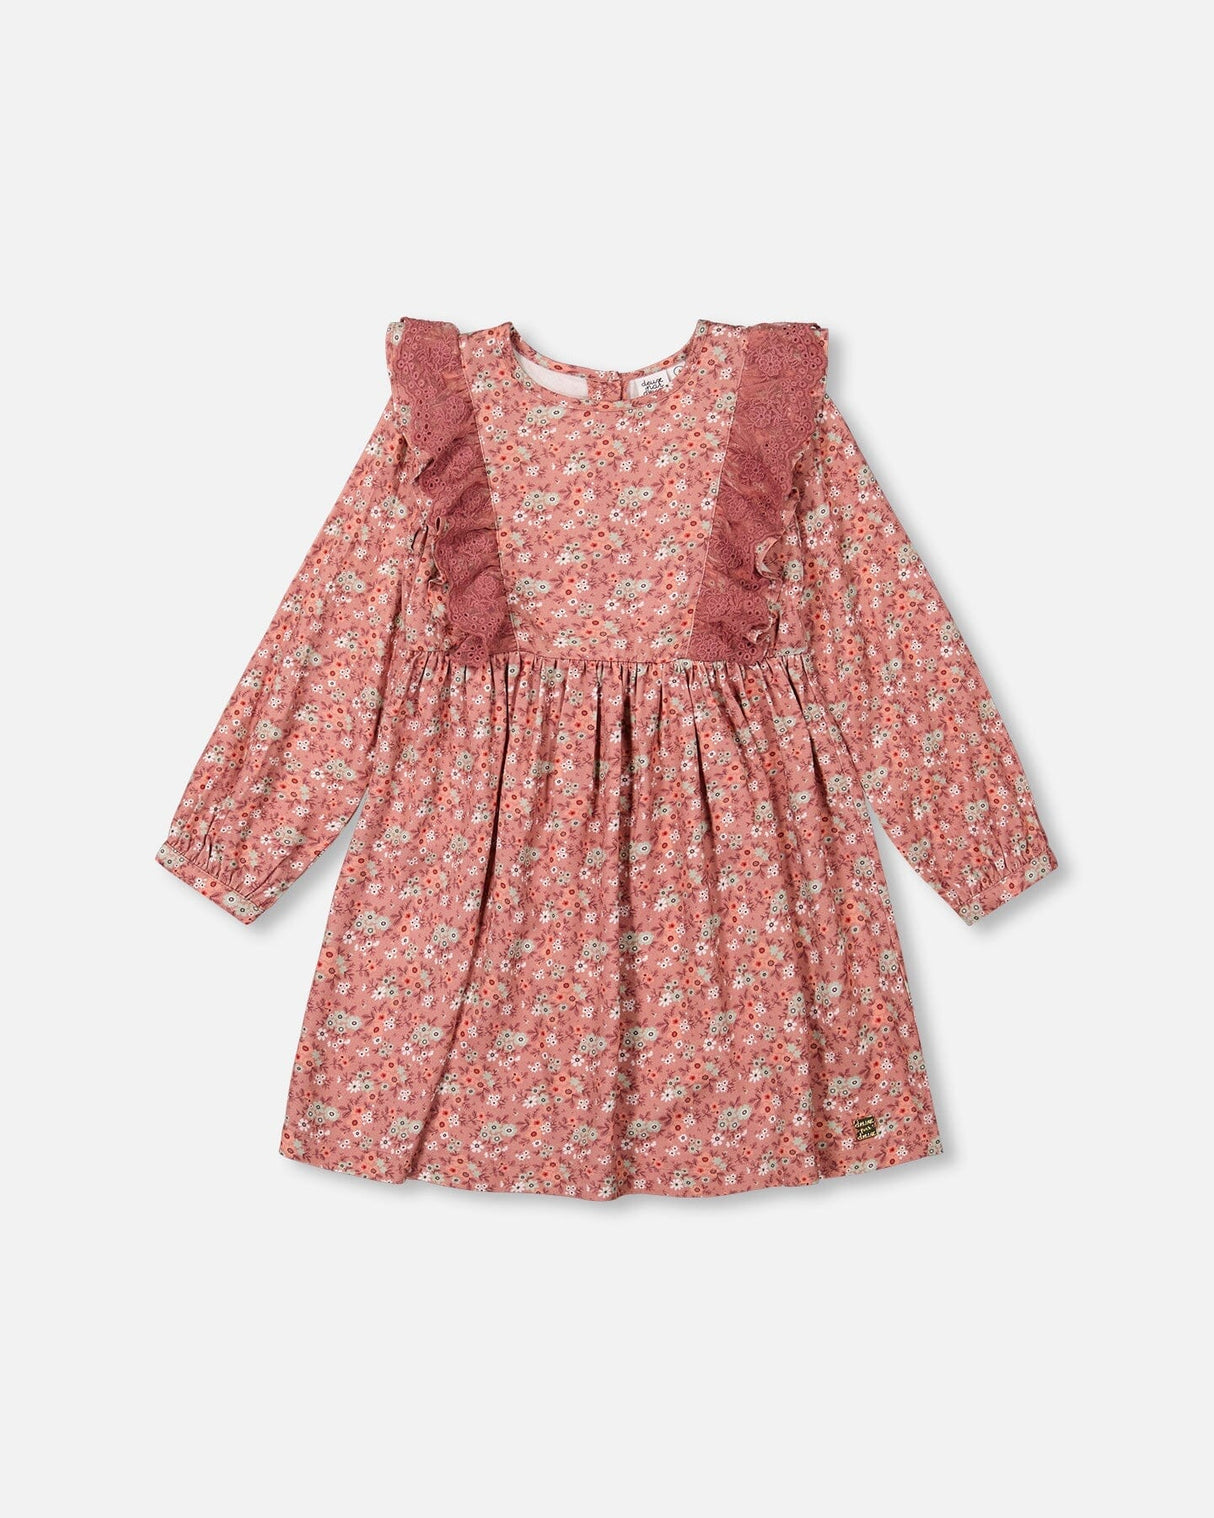 Printed Woven Dress With Frills Dusty Mauve Floral Print-0